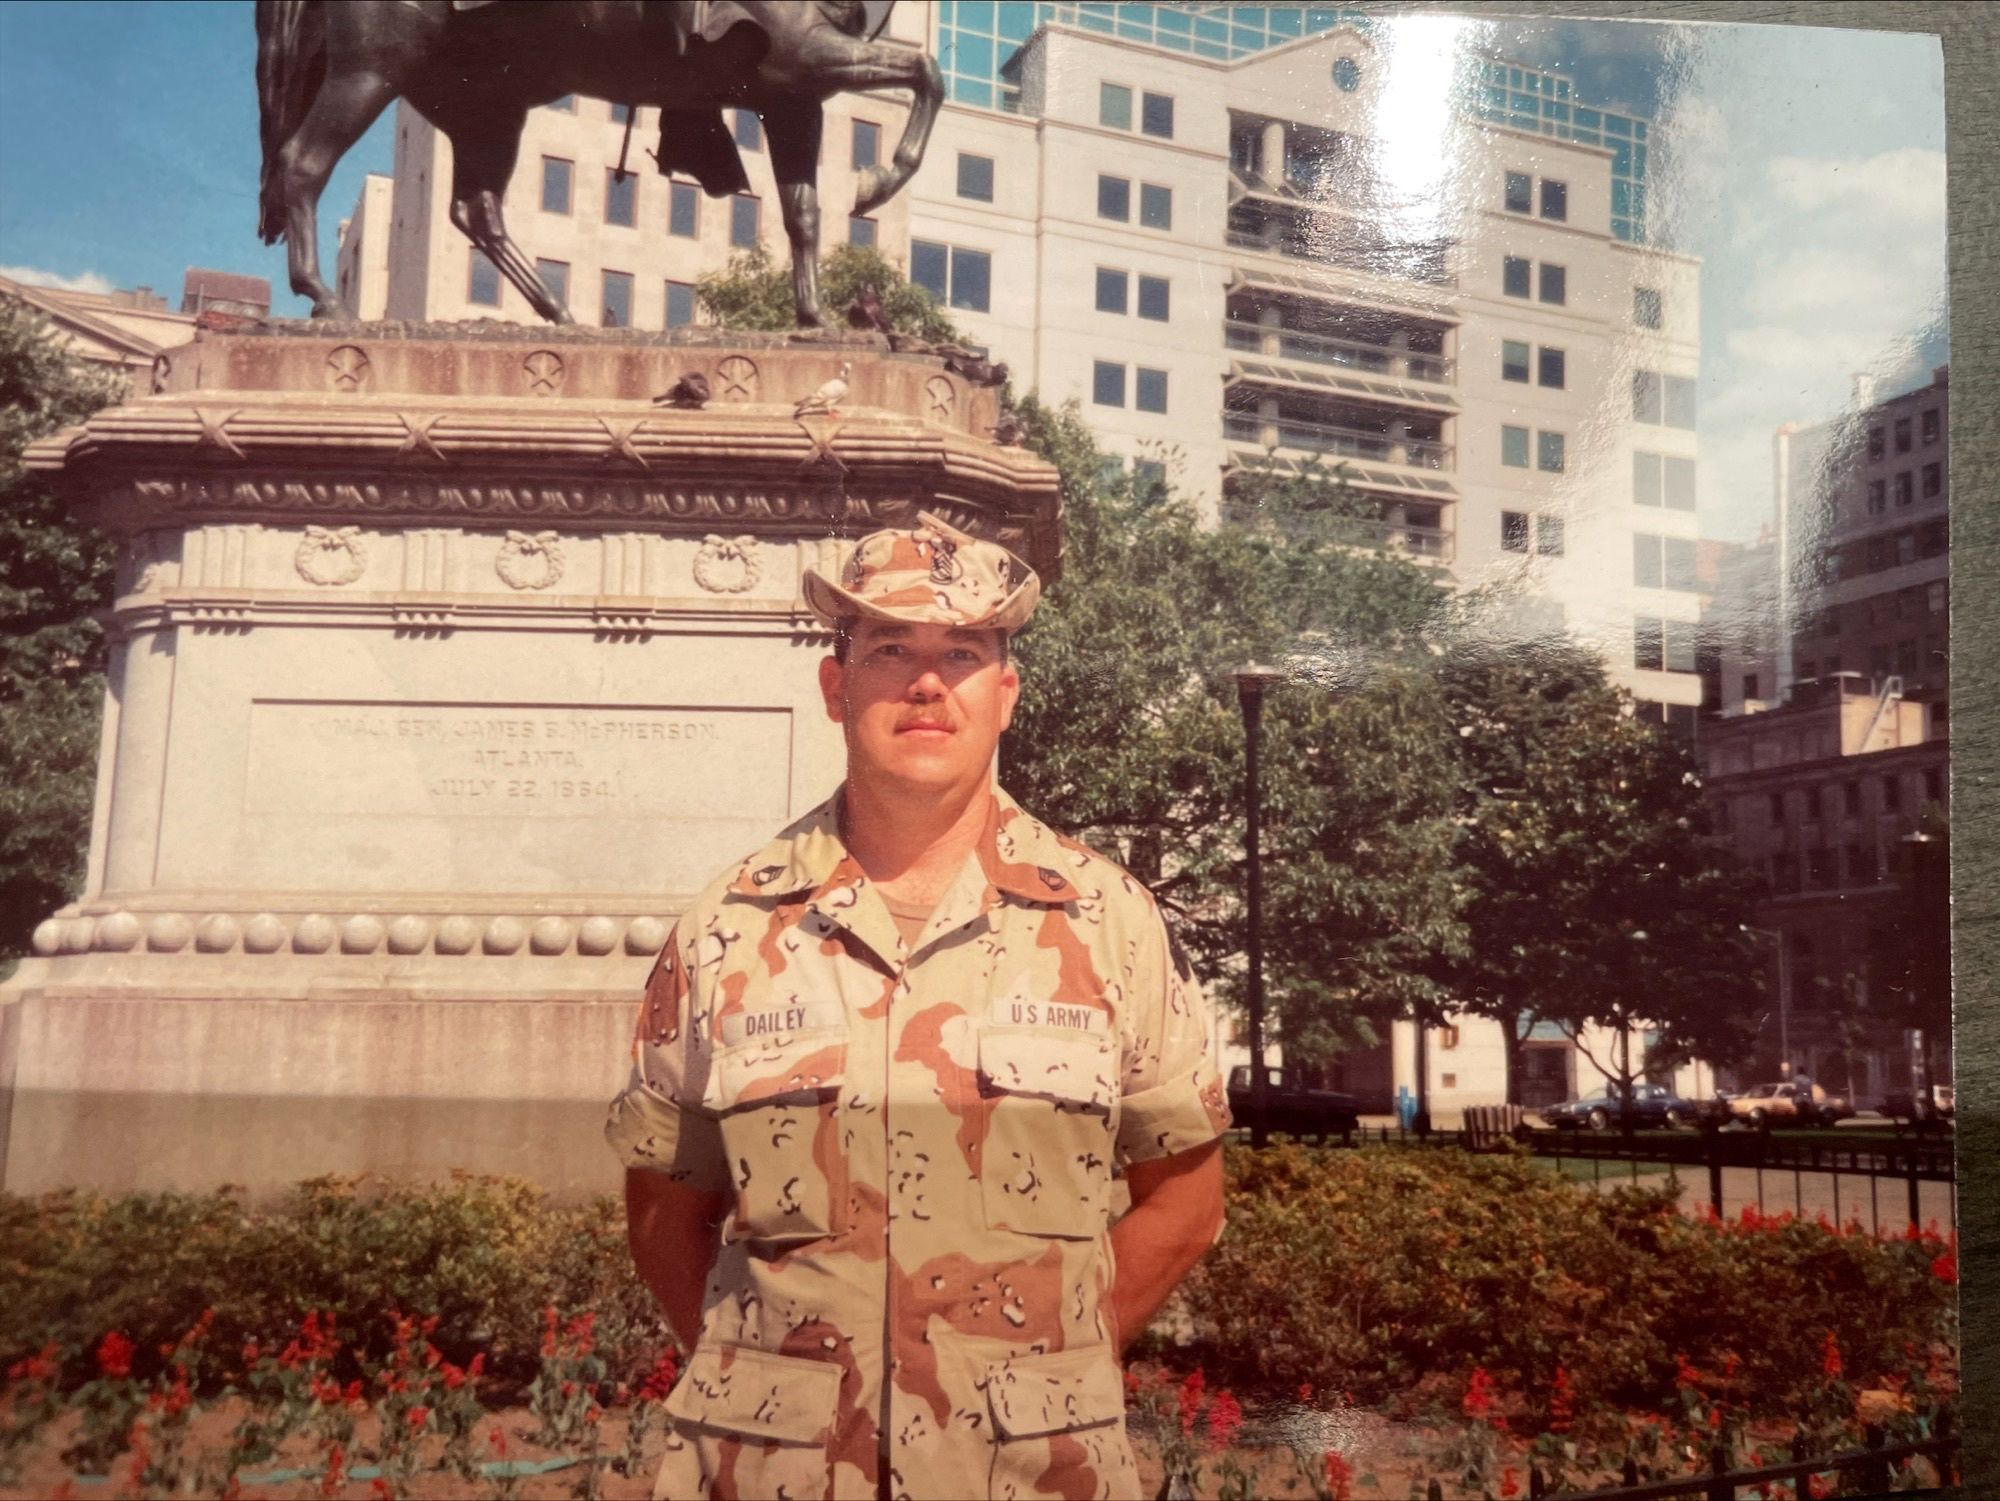 Retired U.S. Army Master Sgt. Stephen Dailey in Washington, DC during his military service.